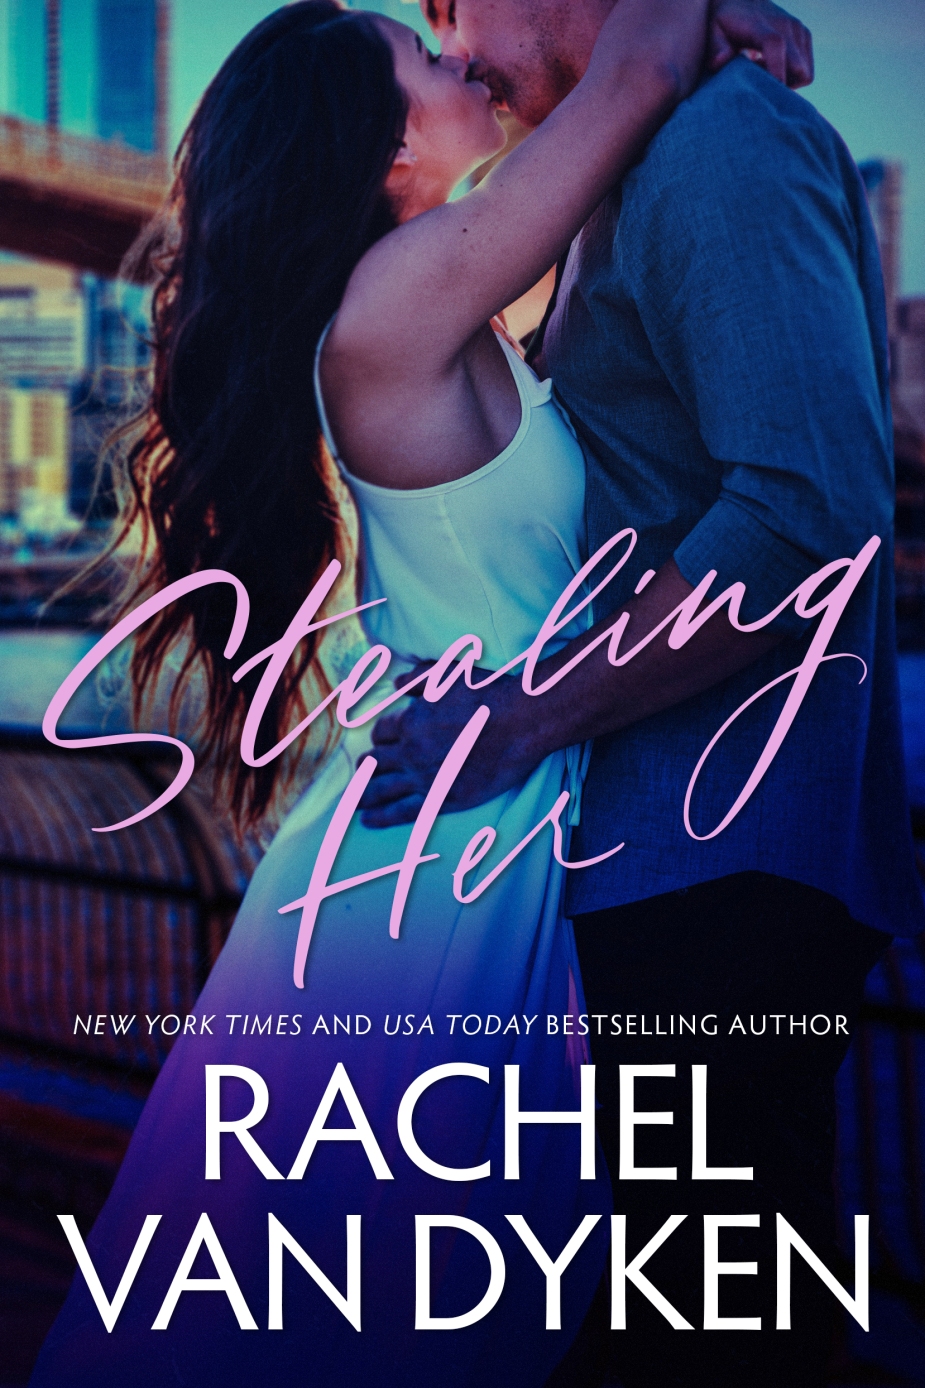 Copy of Stealing Her Cover.jpg